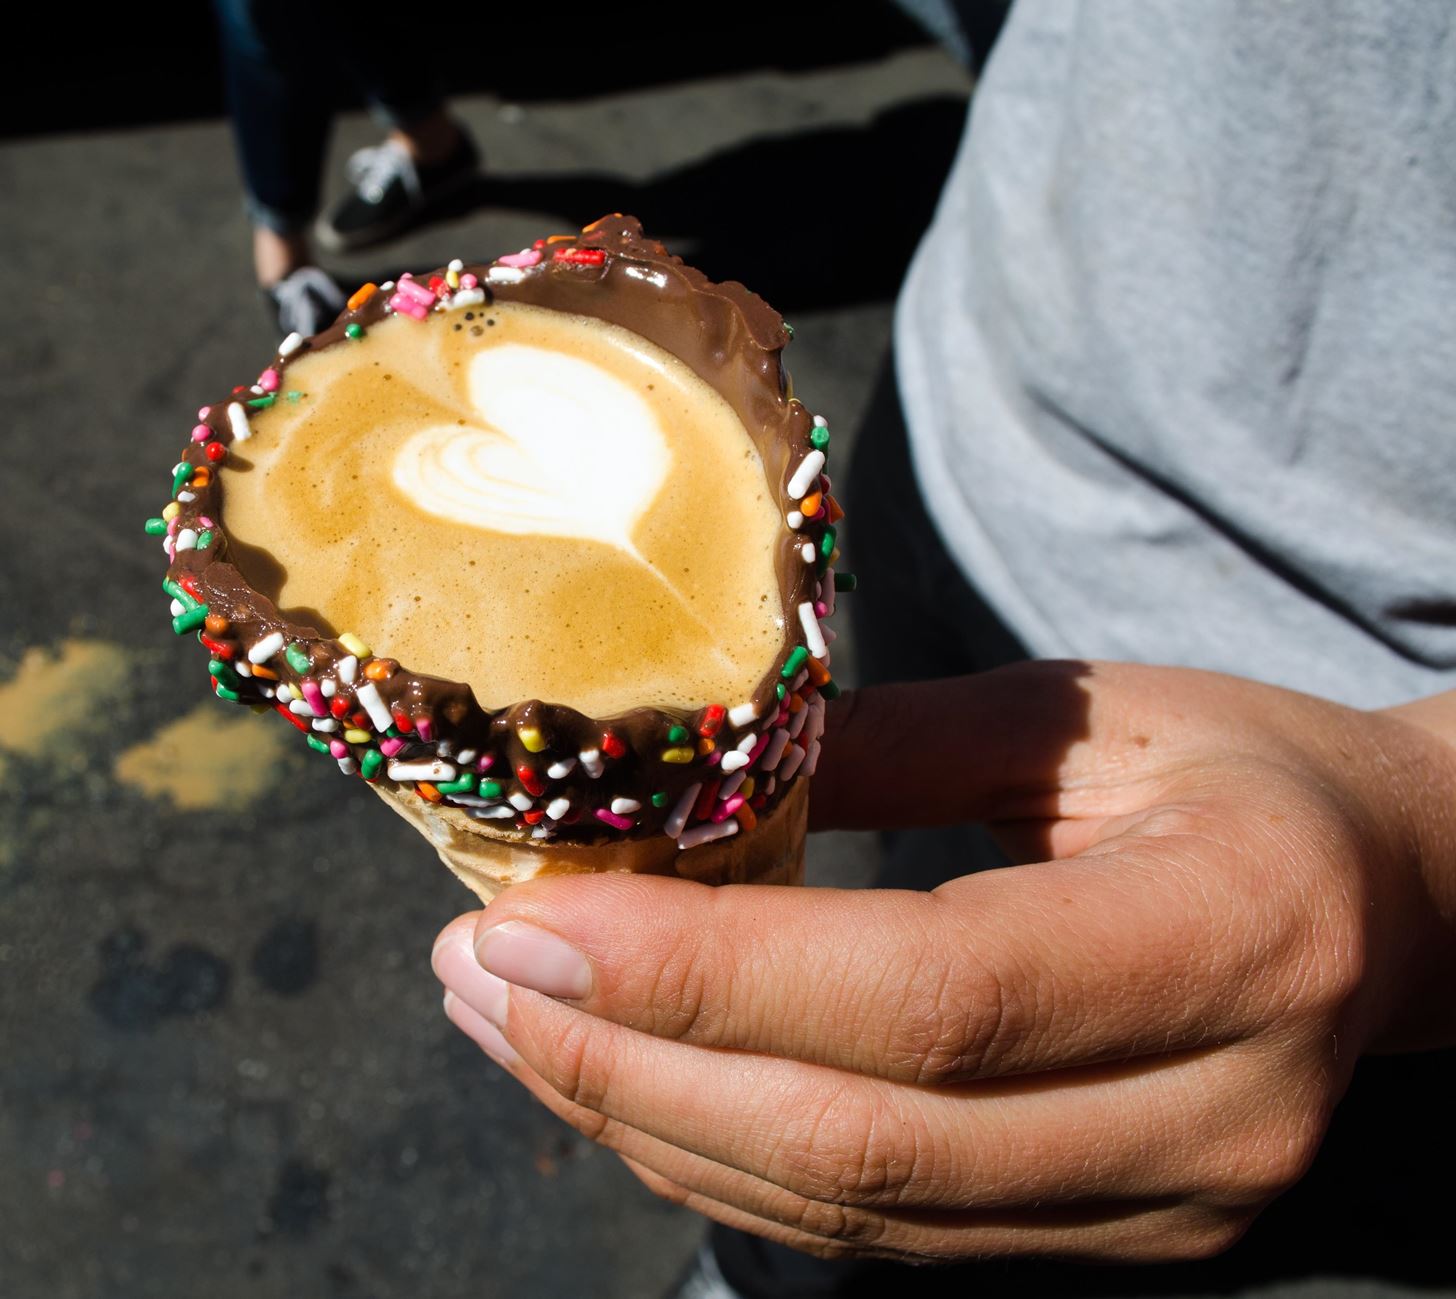 Finally—Impress Your Friends with Espresso in a Cone